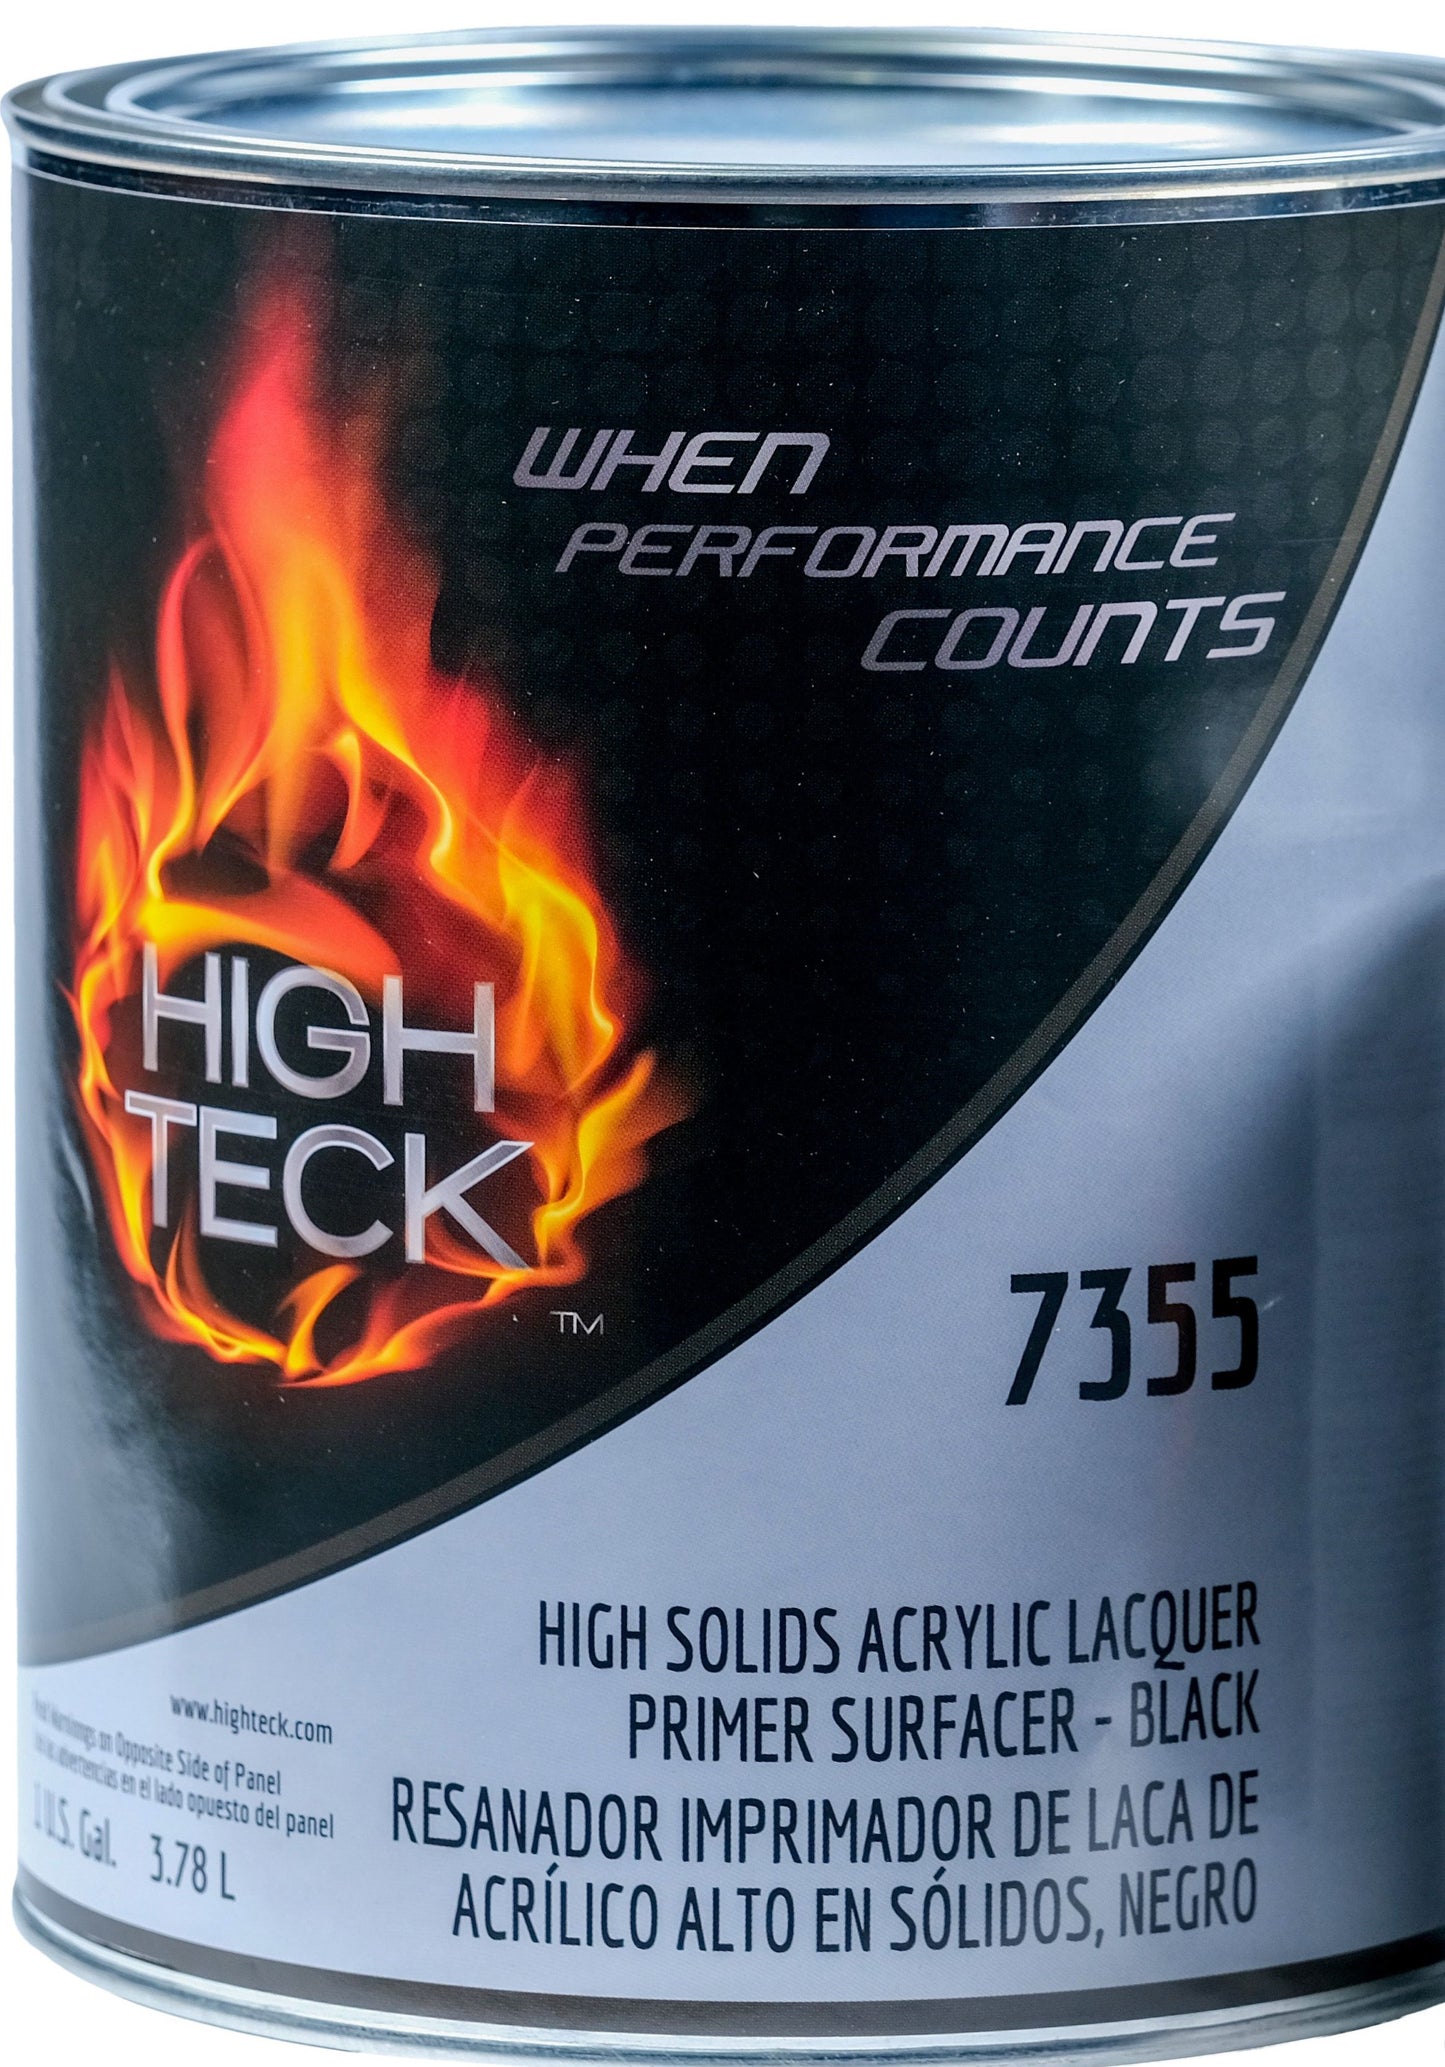 High Teck 7355, High Solids Acrylic Lacquer Primer Surfacer, Black